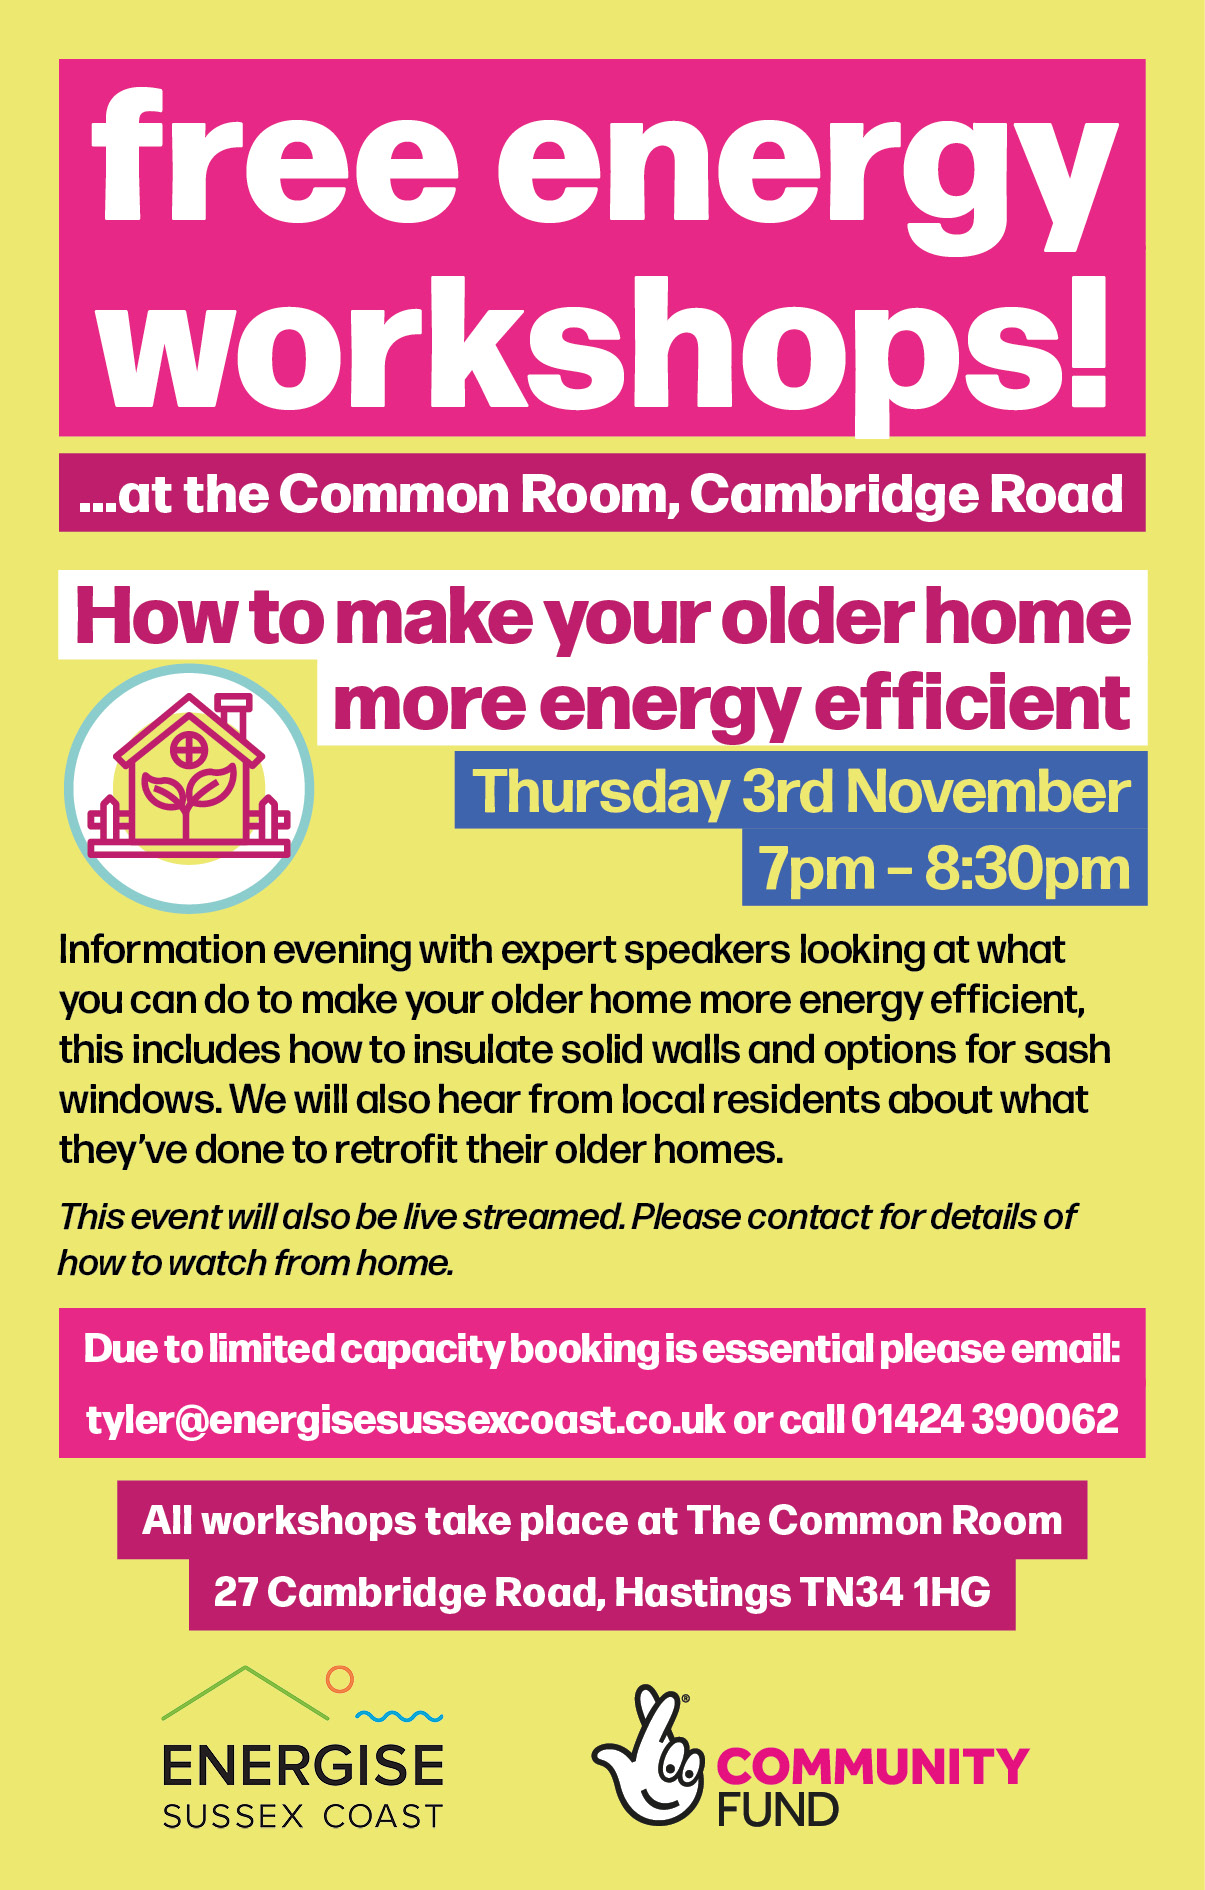 how-to-make-your-older-home-more-energy-efficient-energise-sussex-coast